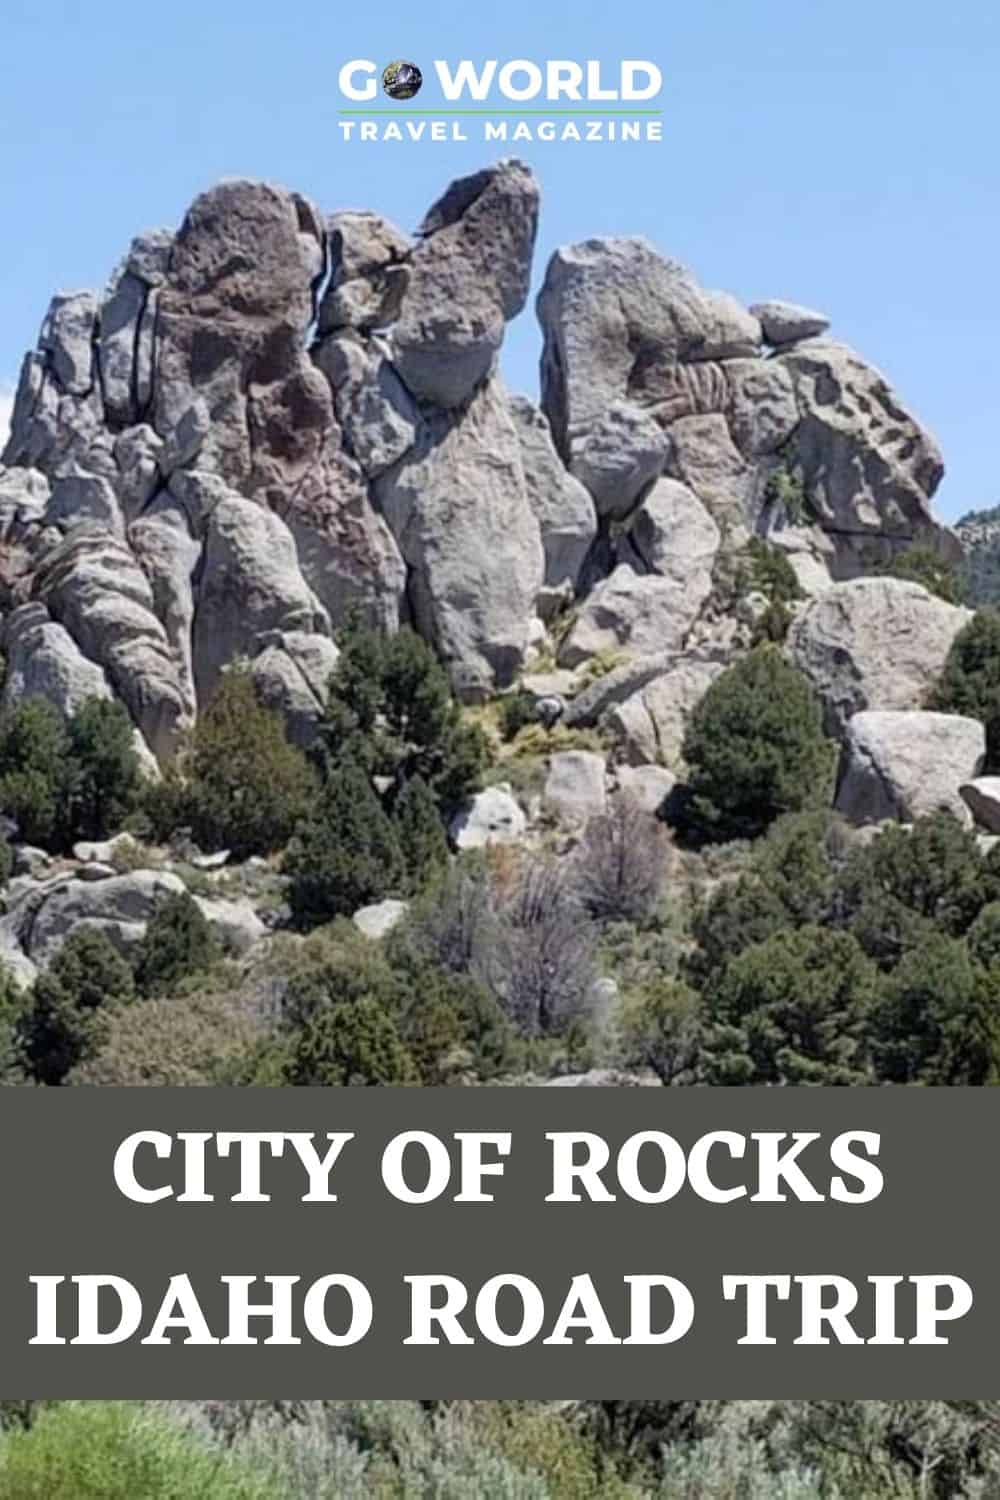 A road trip along the City of Rocks Backcountry Byway in Idaho has stunning scenery, unique rock formations and historic towns without crowds. #USAroadtrips #idaho